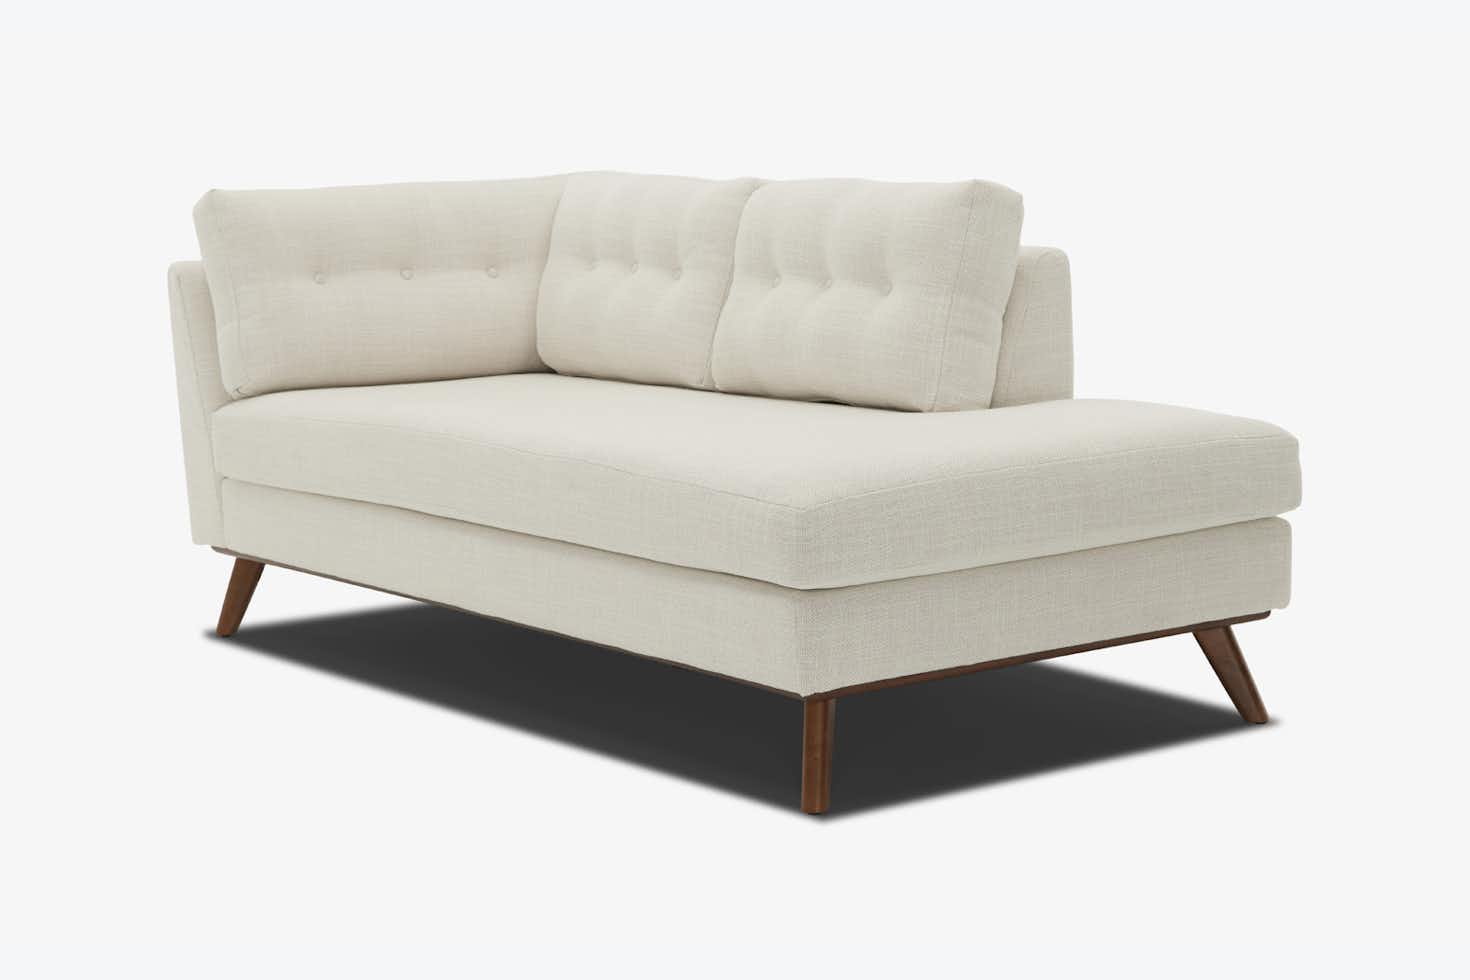 Hopson Bumper Chaise Asbury Oyster